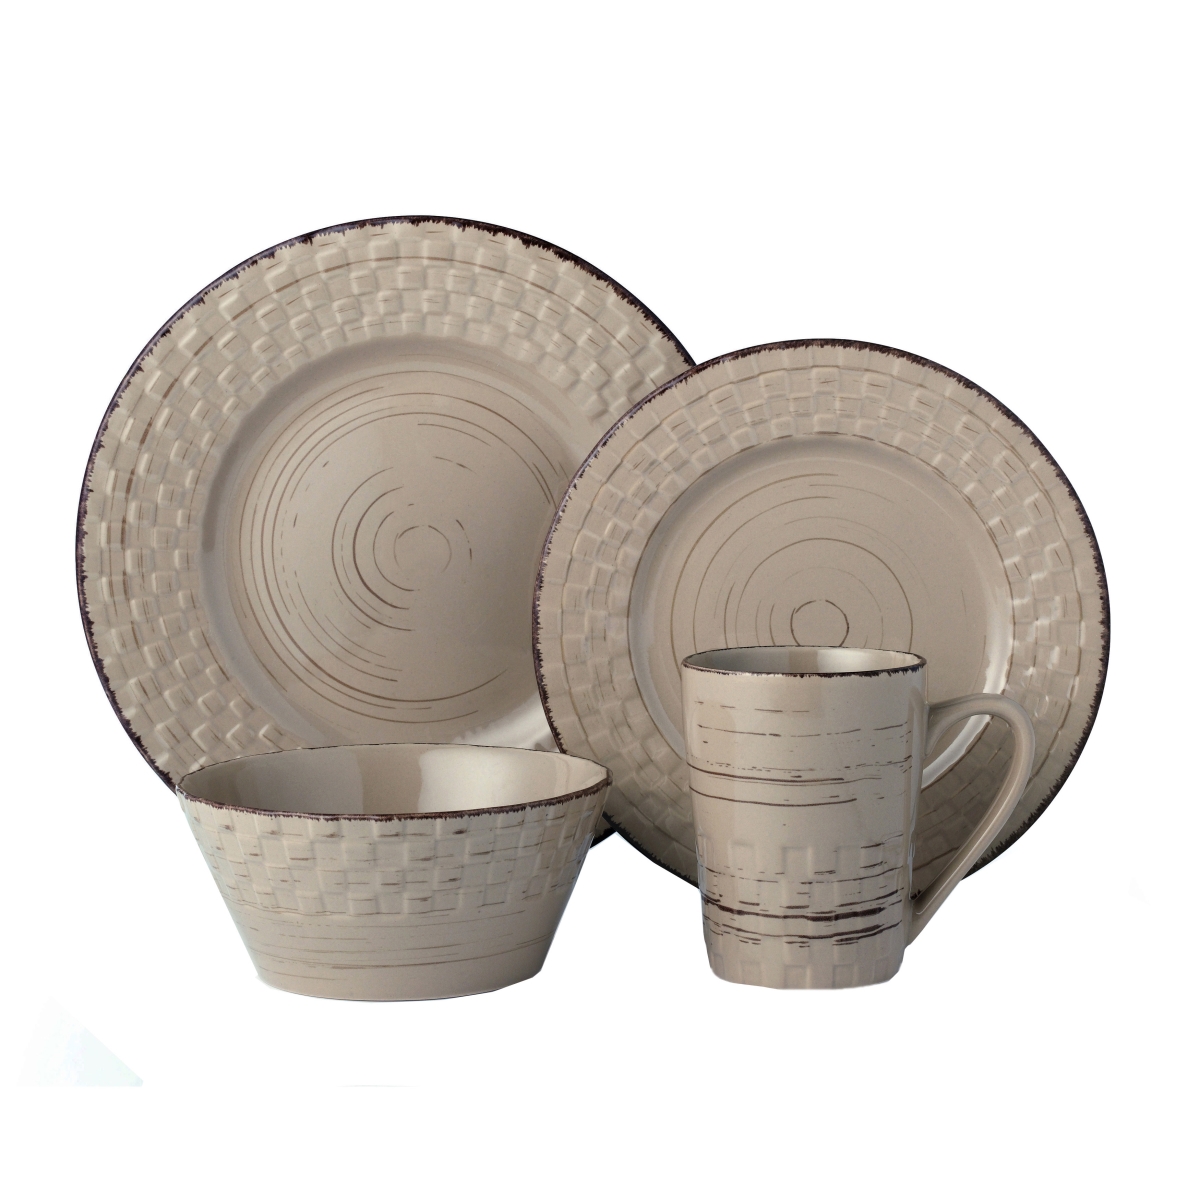 Picture of Lorren Home Trends LH515 16 Piece Distressed Weave Dinnerware Set, Mocca